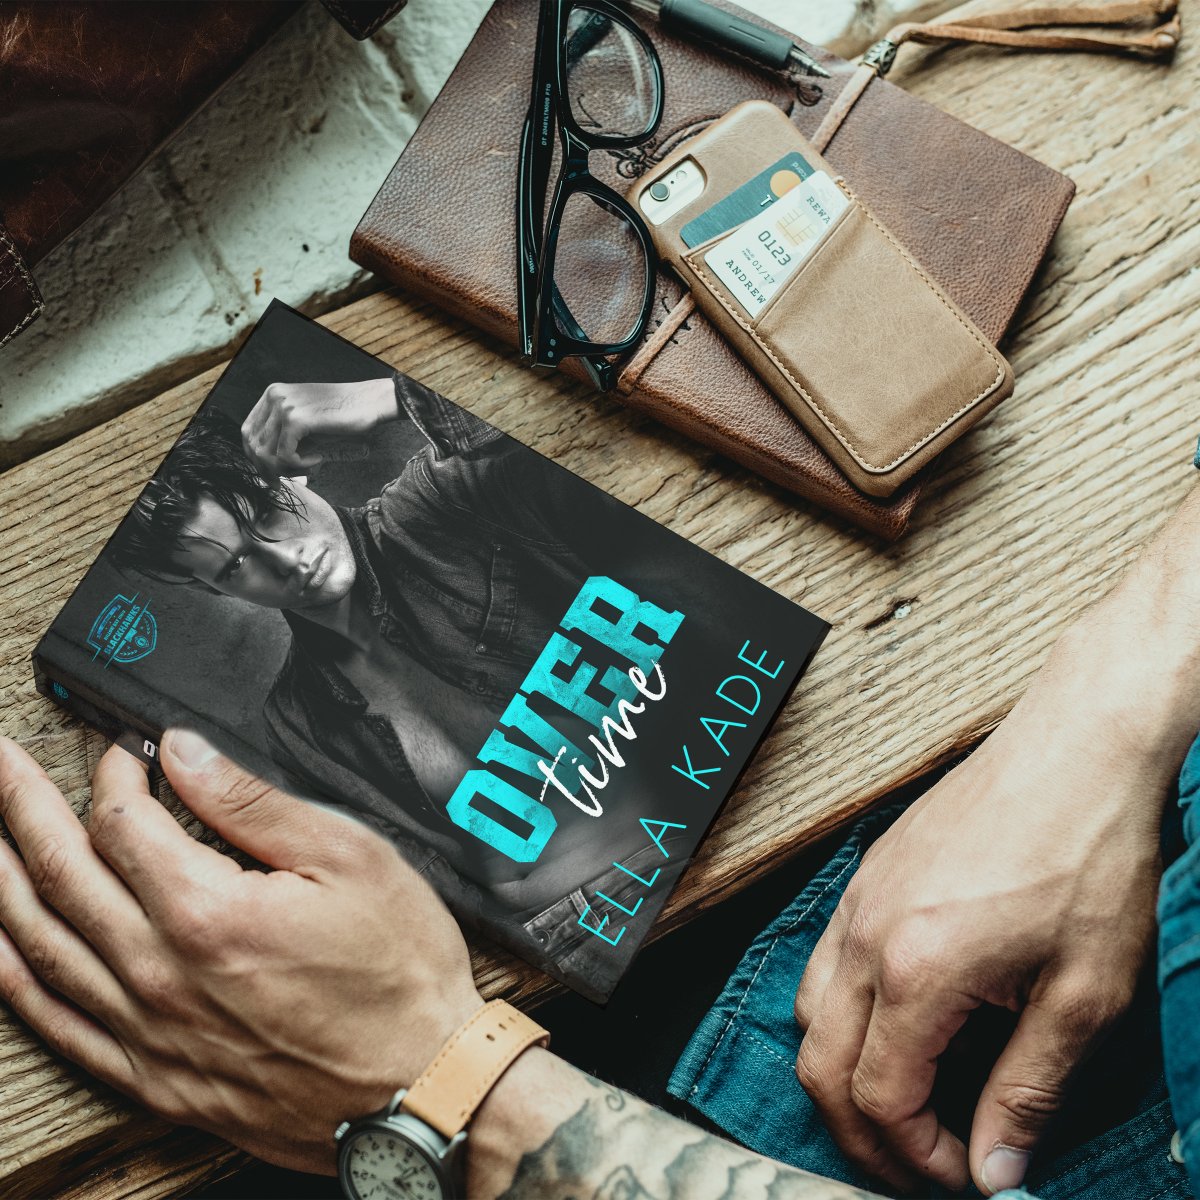 A M/M romance with a few twists that will keep you glued till the end. -Christy Davisson

Read OVER TIME today on Amazon or FREE on Kindle Unlimited today. 

🌈 Amazon | KU: rfr.bz/t8uqysc 

#studentprofessorromance #bisexual #sportsromance #amazon